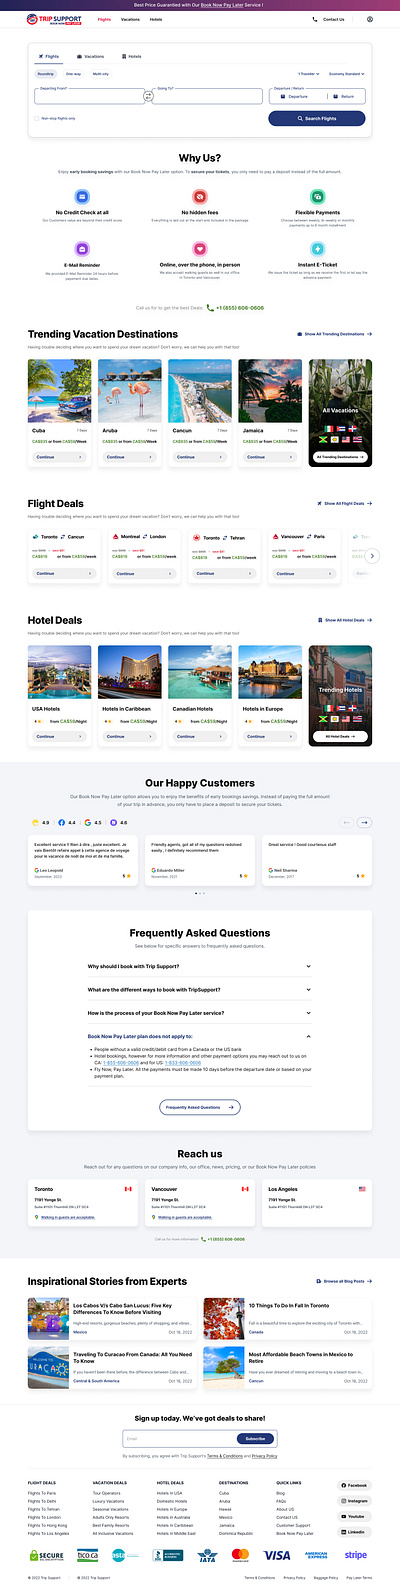 Travel Agency Website design branding cards graphic design minimal one page design tour agency travel travel agency traveling ui ui design ui ux uiux user interface ux